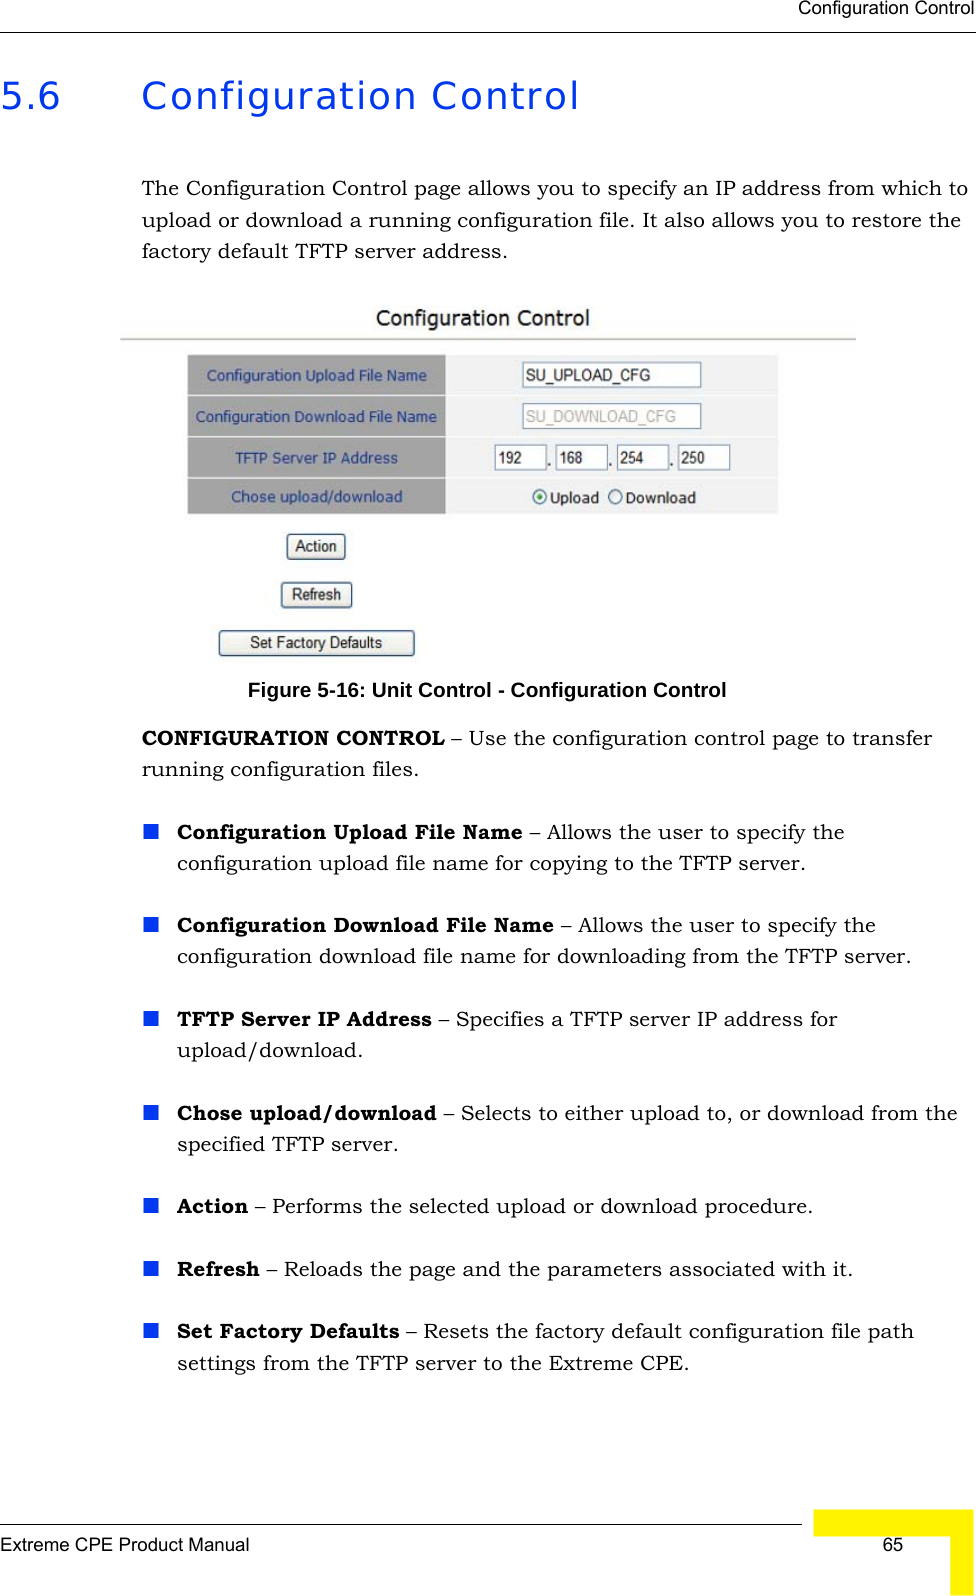 Configuration ControlExtreme CPE Product Manual  655.6 Configuration ControlThe Configuration Control page allows you to specify an IP address from which to upload or download a running configuration file. It also allows you to restore the factory default TFTP server address.Figure 5-16: Unit Control - Configuration ControlCONFIGURATION CONTROL – Use the configuration control page to transfer running configuration files.Configuration Upload File Name – Allows the user to specify the configuration upload file name for copying to the TFTP server.Configuration Download File Name – Allows the user to specify the configuration download file name for downloading from the TFTP server.TFTP Server IP Address – Specifies a TFTP server IP address for upload/download.Chose upload/download – Selects to either upload to, or download from the specified TFTP server.Action – Performs the selected upload or download procedure.Refresh – Reloads the page and the parameters associated with it.Set Factory Defaults – Resets the factory default configuration file path settings from the TFTP server to the Extreme CPE. 